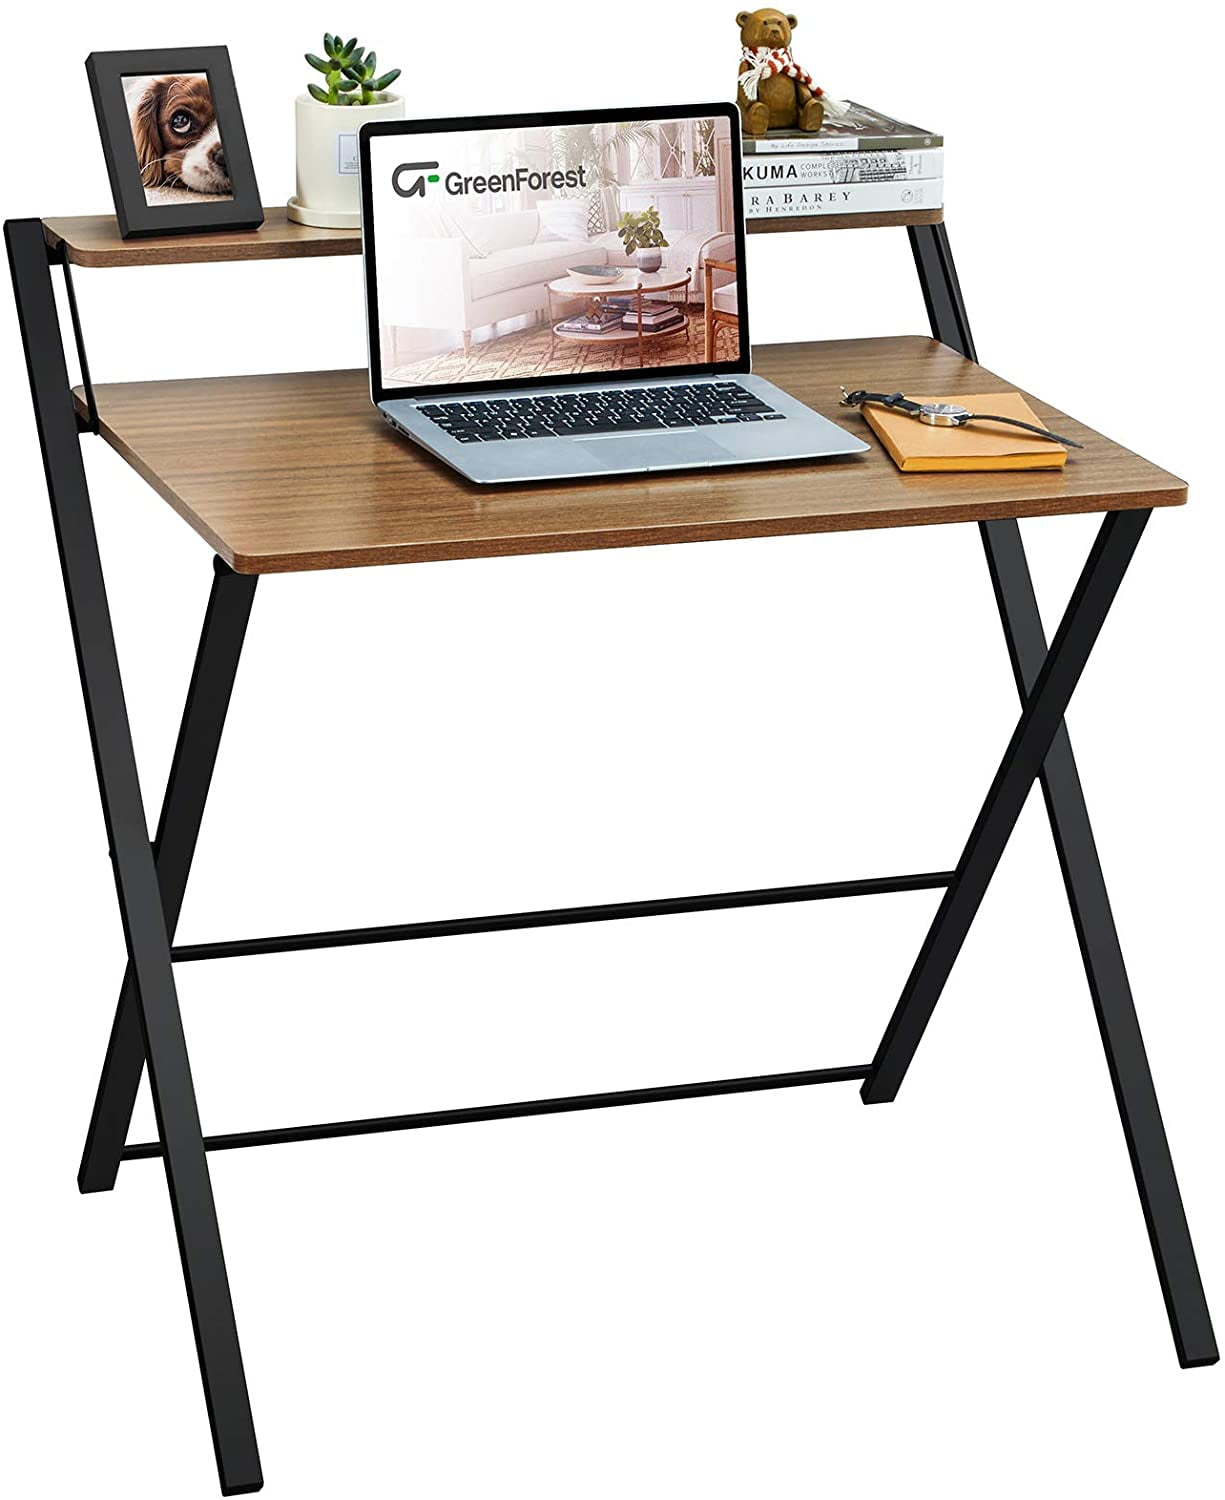 Greenforest small Folding desk 2 animal equipo desk with shelf Home Office 